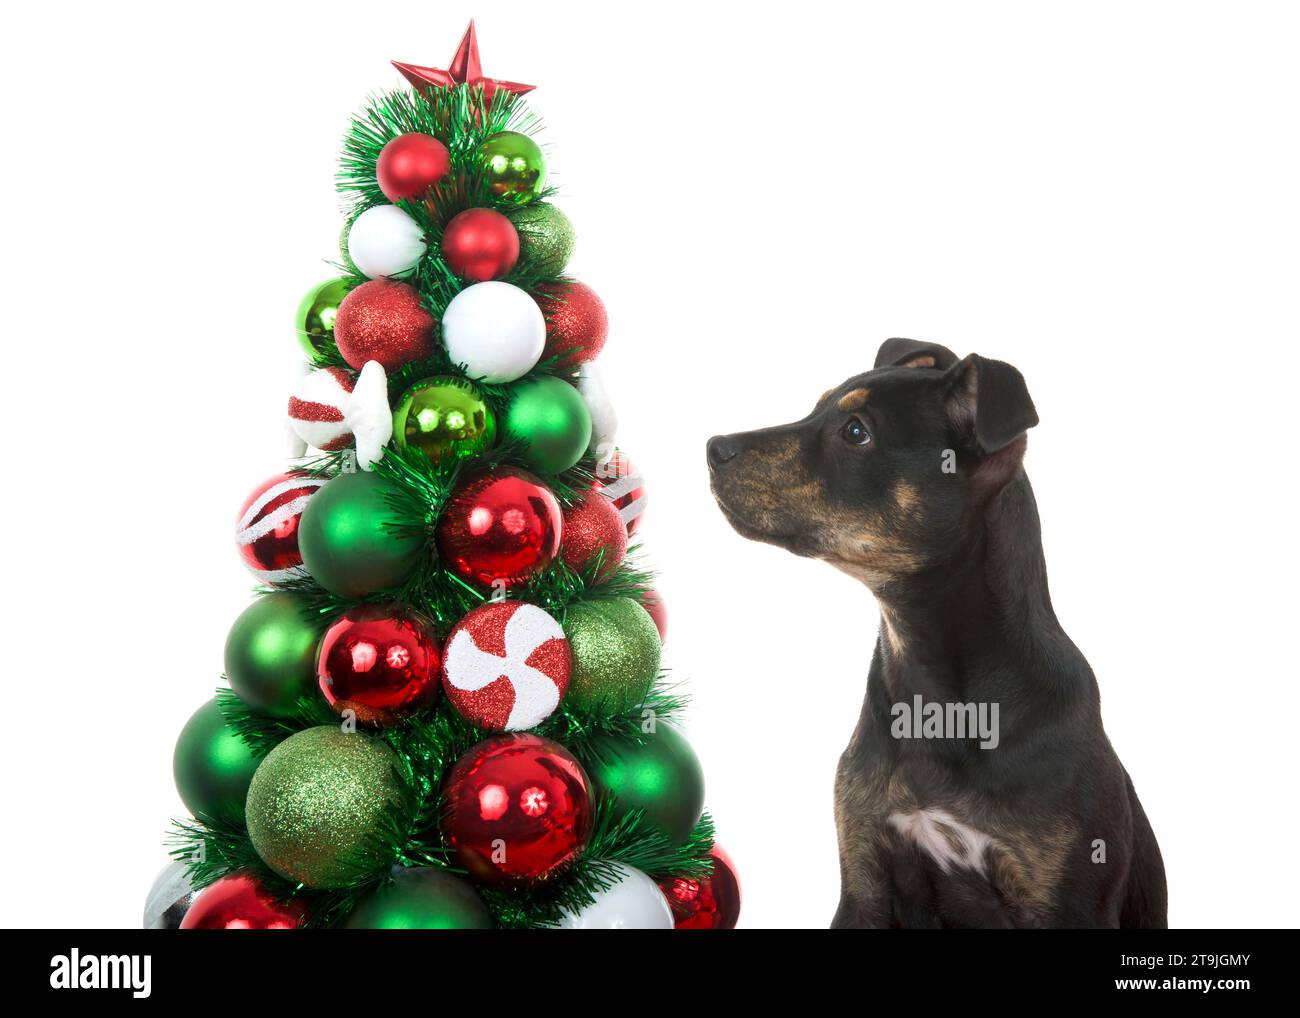 Black and brown brindle American Staffordshire Terrier puppy dog next to a Christmas tree covered in colorful ball ornaments, puppy looking up at tree Stock Photo